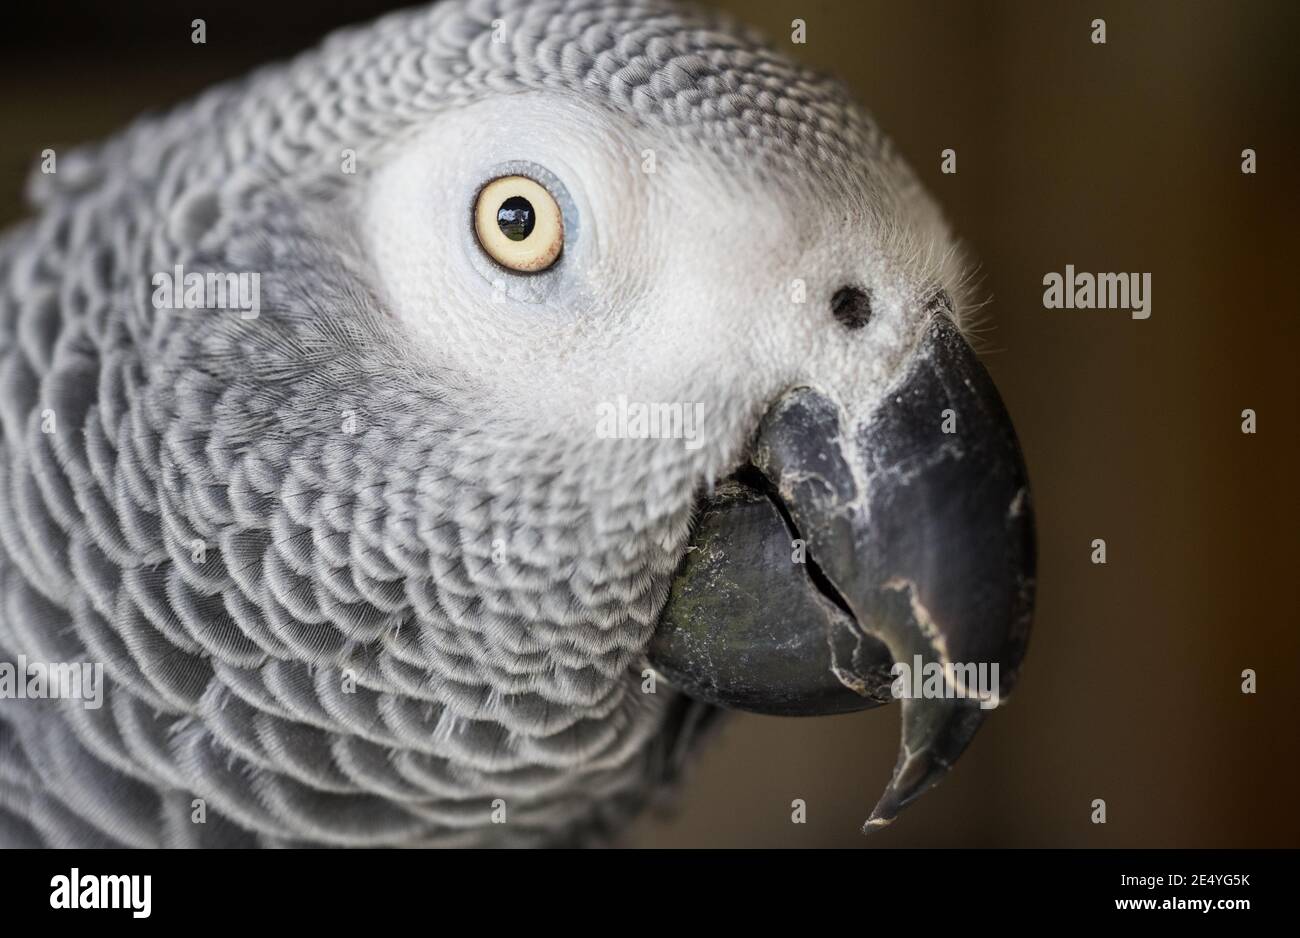 Close up potrait of African grey parrot Stock Photo